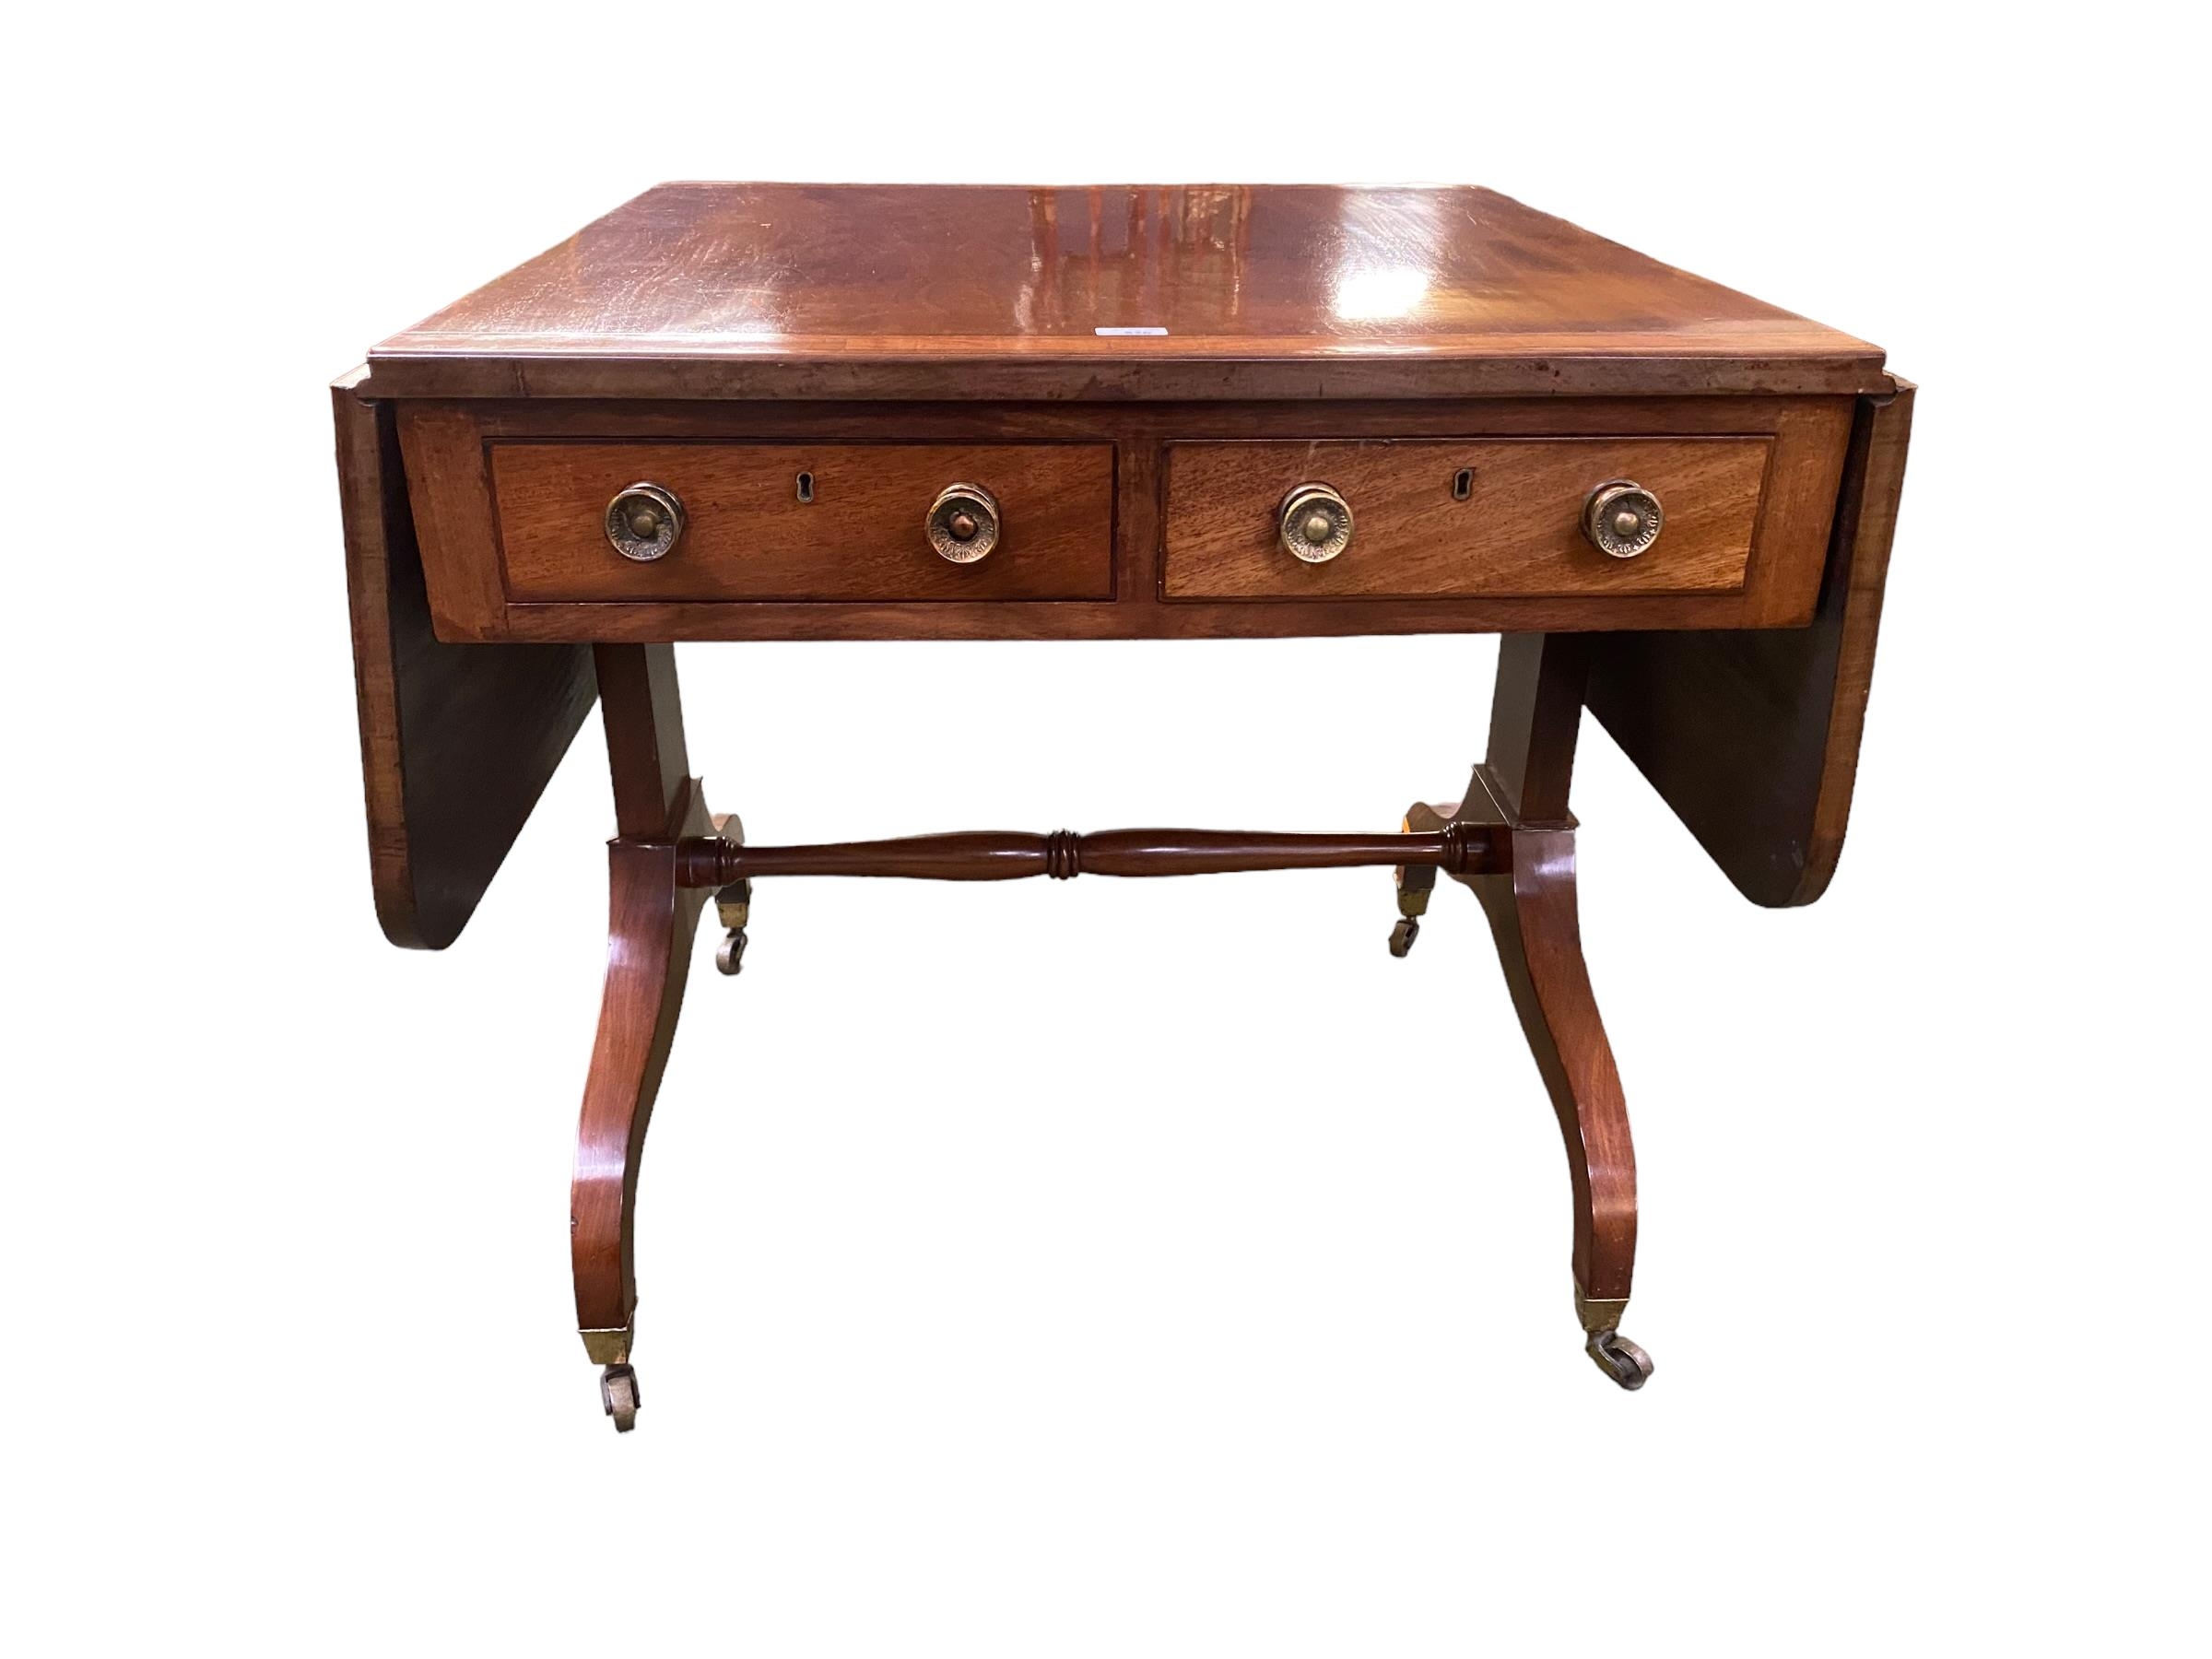 Regency inlaid mahogany sofa table , 2 drawers opening to each side (4 drawers in total), 137 cm